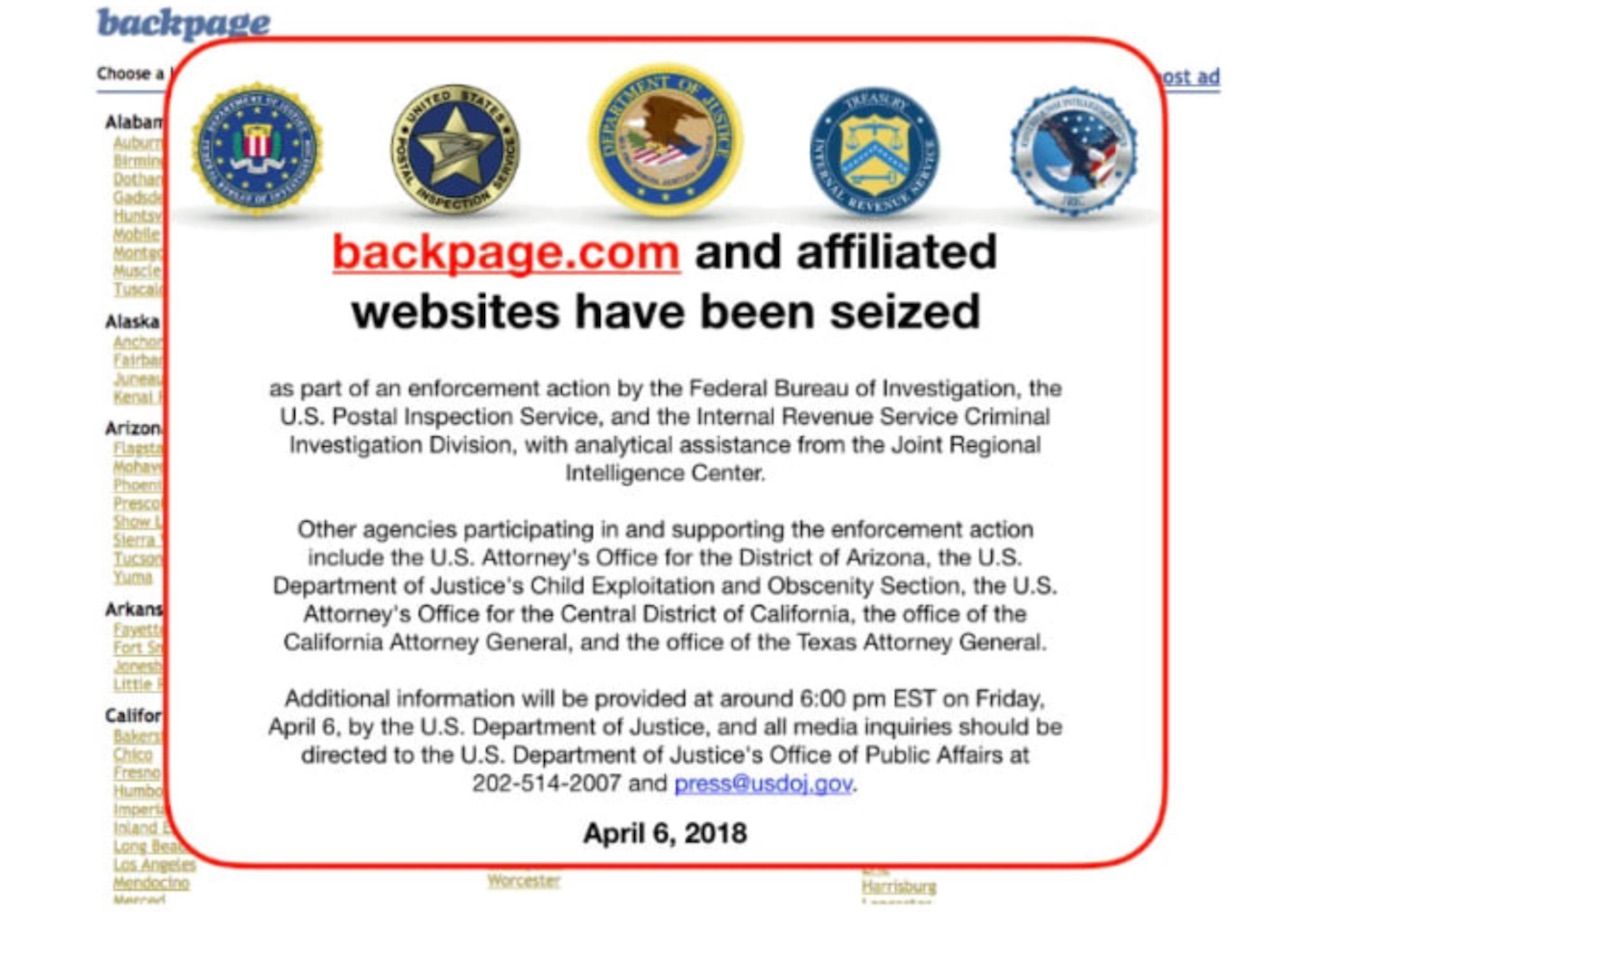 Cato Institute Files Court Brief Opposing Govt’s Backpage Seizure